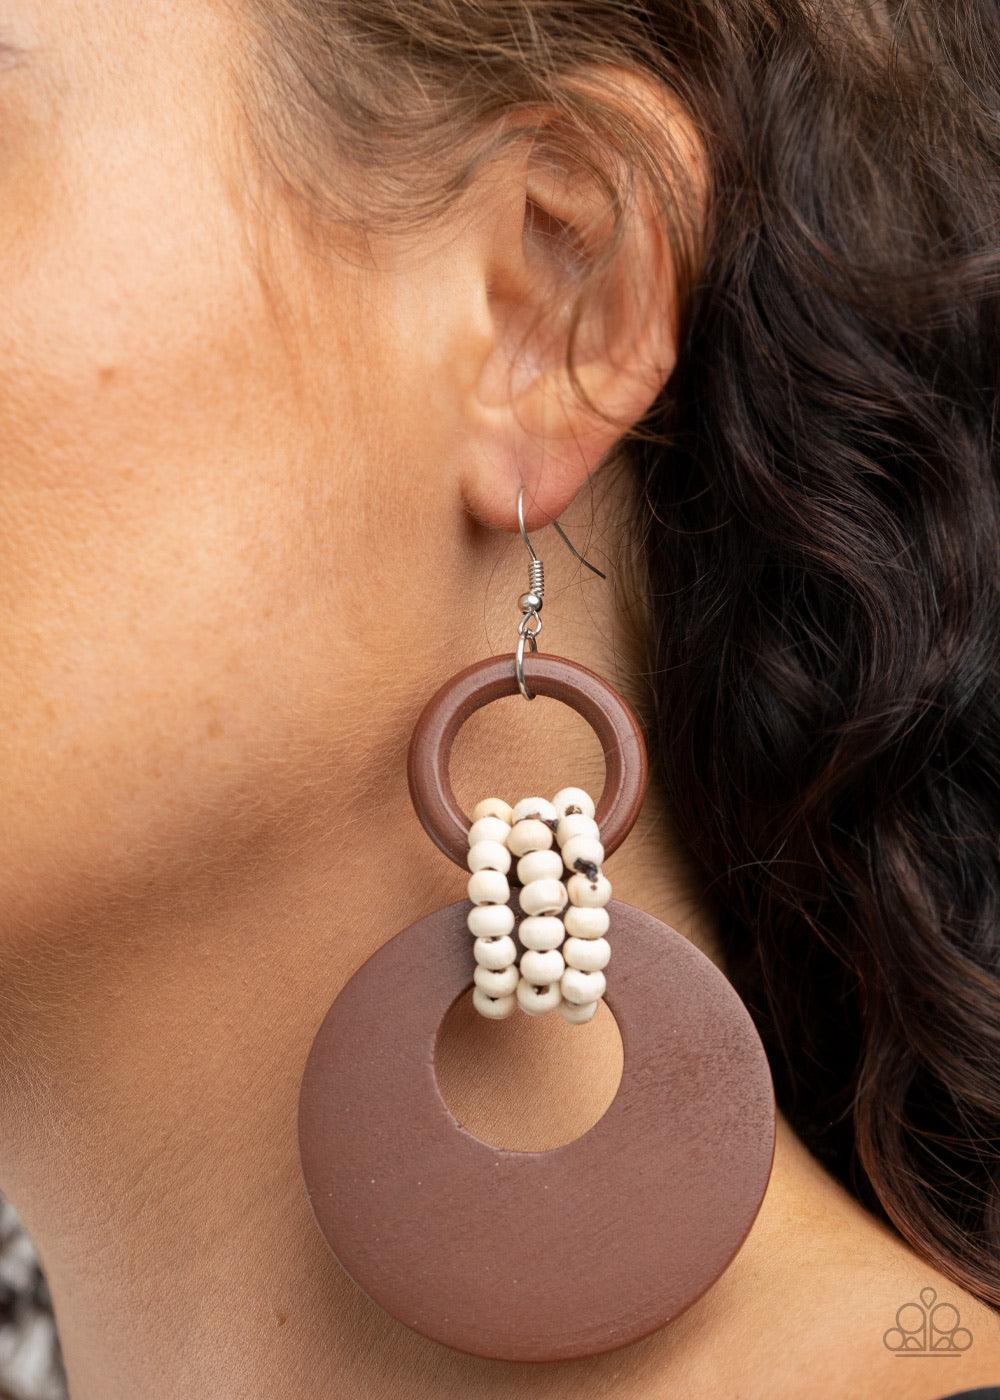 Paparazzi Accessories Beach Day Drama - Brown White wooden beaded links connect together a brown wooden ring and an oversized brown wooden crescent-like hoop, creating a uniquely earthy lure. Earring attaches to a standard fishhook fitting. Sold as one pa